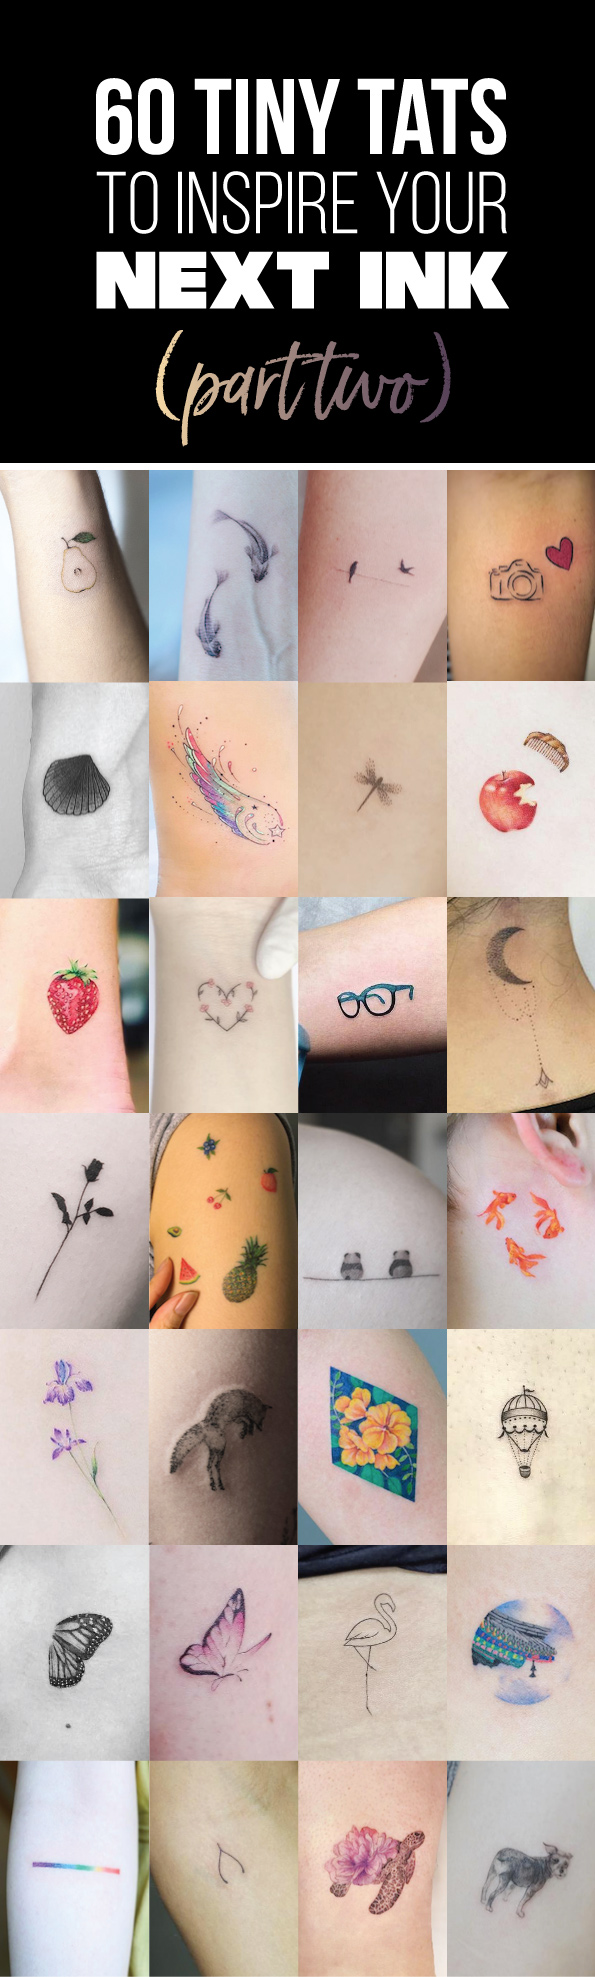 60 Tiny Tattoos To Inspire Your Next Ink (Part 2) - TattooBlend